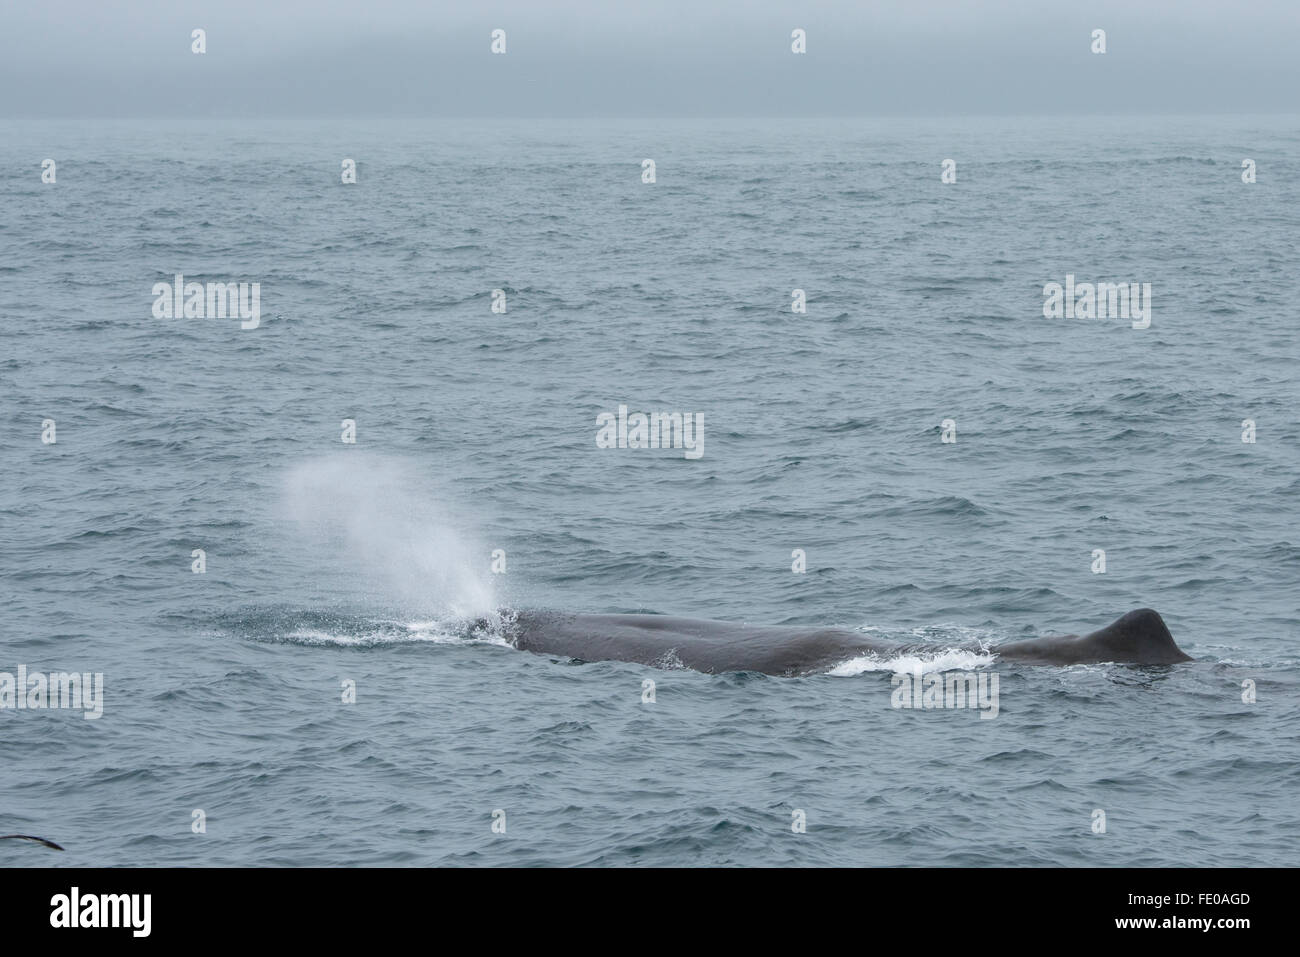 New Zealand, South Island, Kaikoura. Male Sperm whale (Physeter macrocephalus) aka cachalot, largest of the toothed whales. Stock Photo